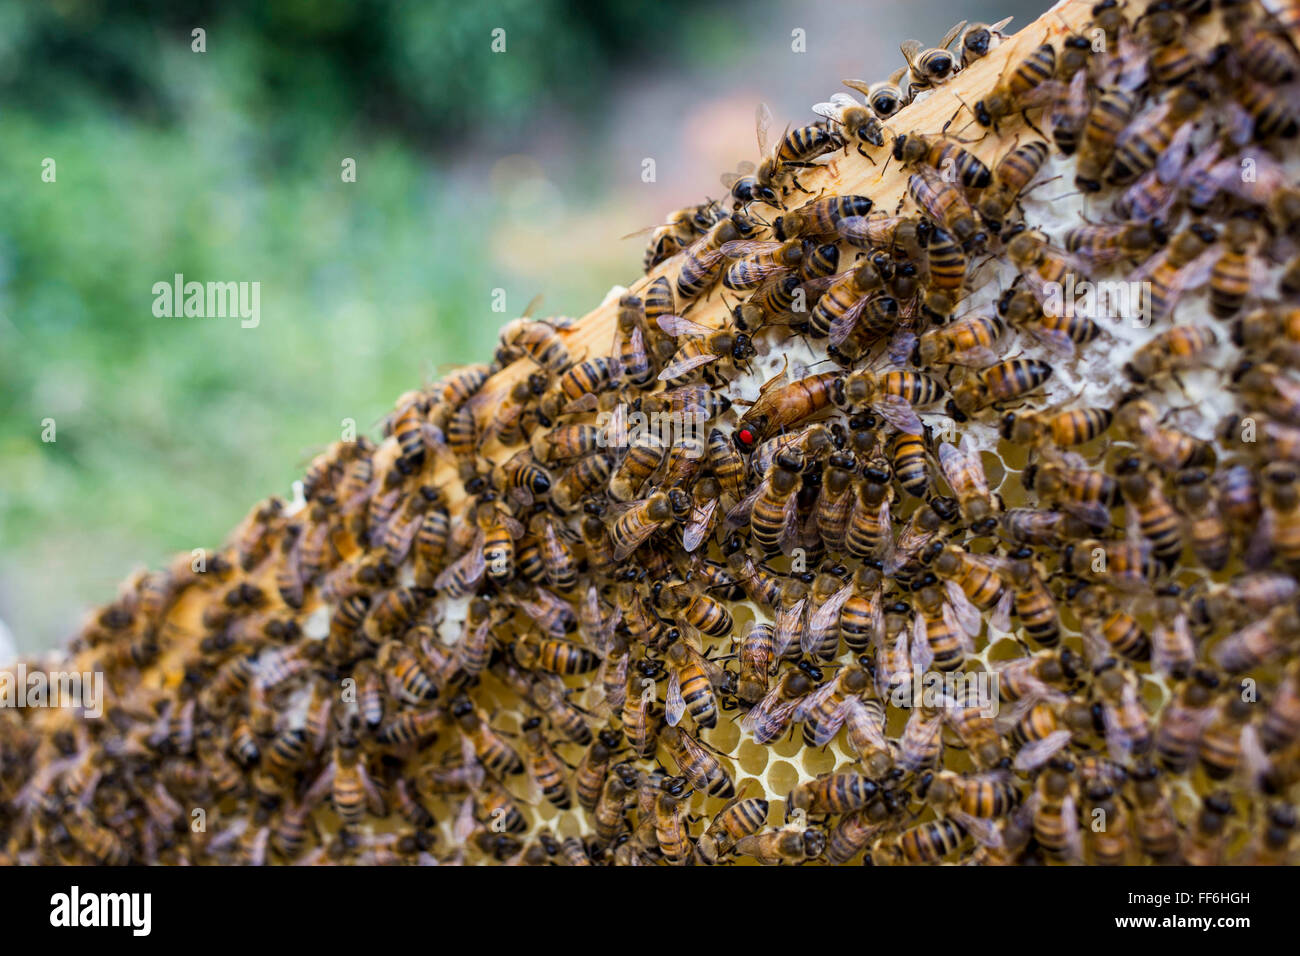 The queen bee (marked with a red dot) on a honey frame with the worker bees. Urban bee keeping, community garden project, George Downing Estate, Hackney, East London. Stock Photo